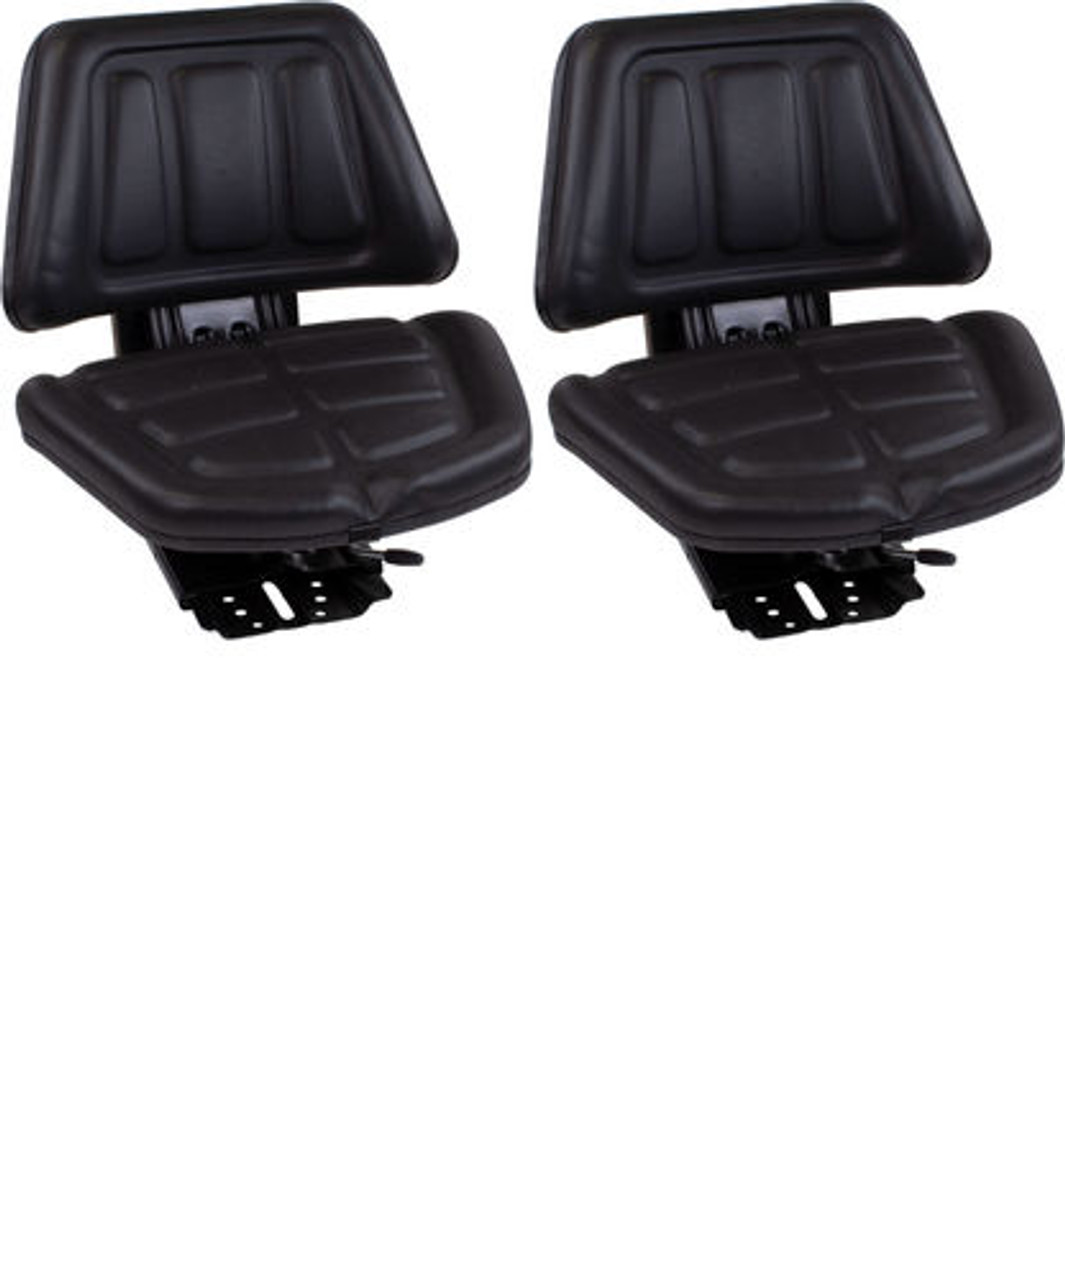 2 Pack Black Trapazoid Universal Tractor Seats Massey Ferguson, Ford and Case-IH